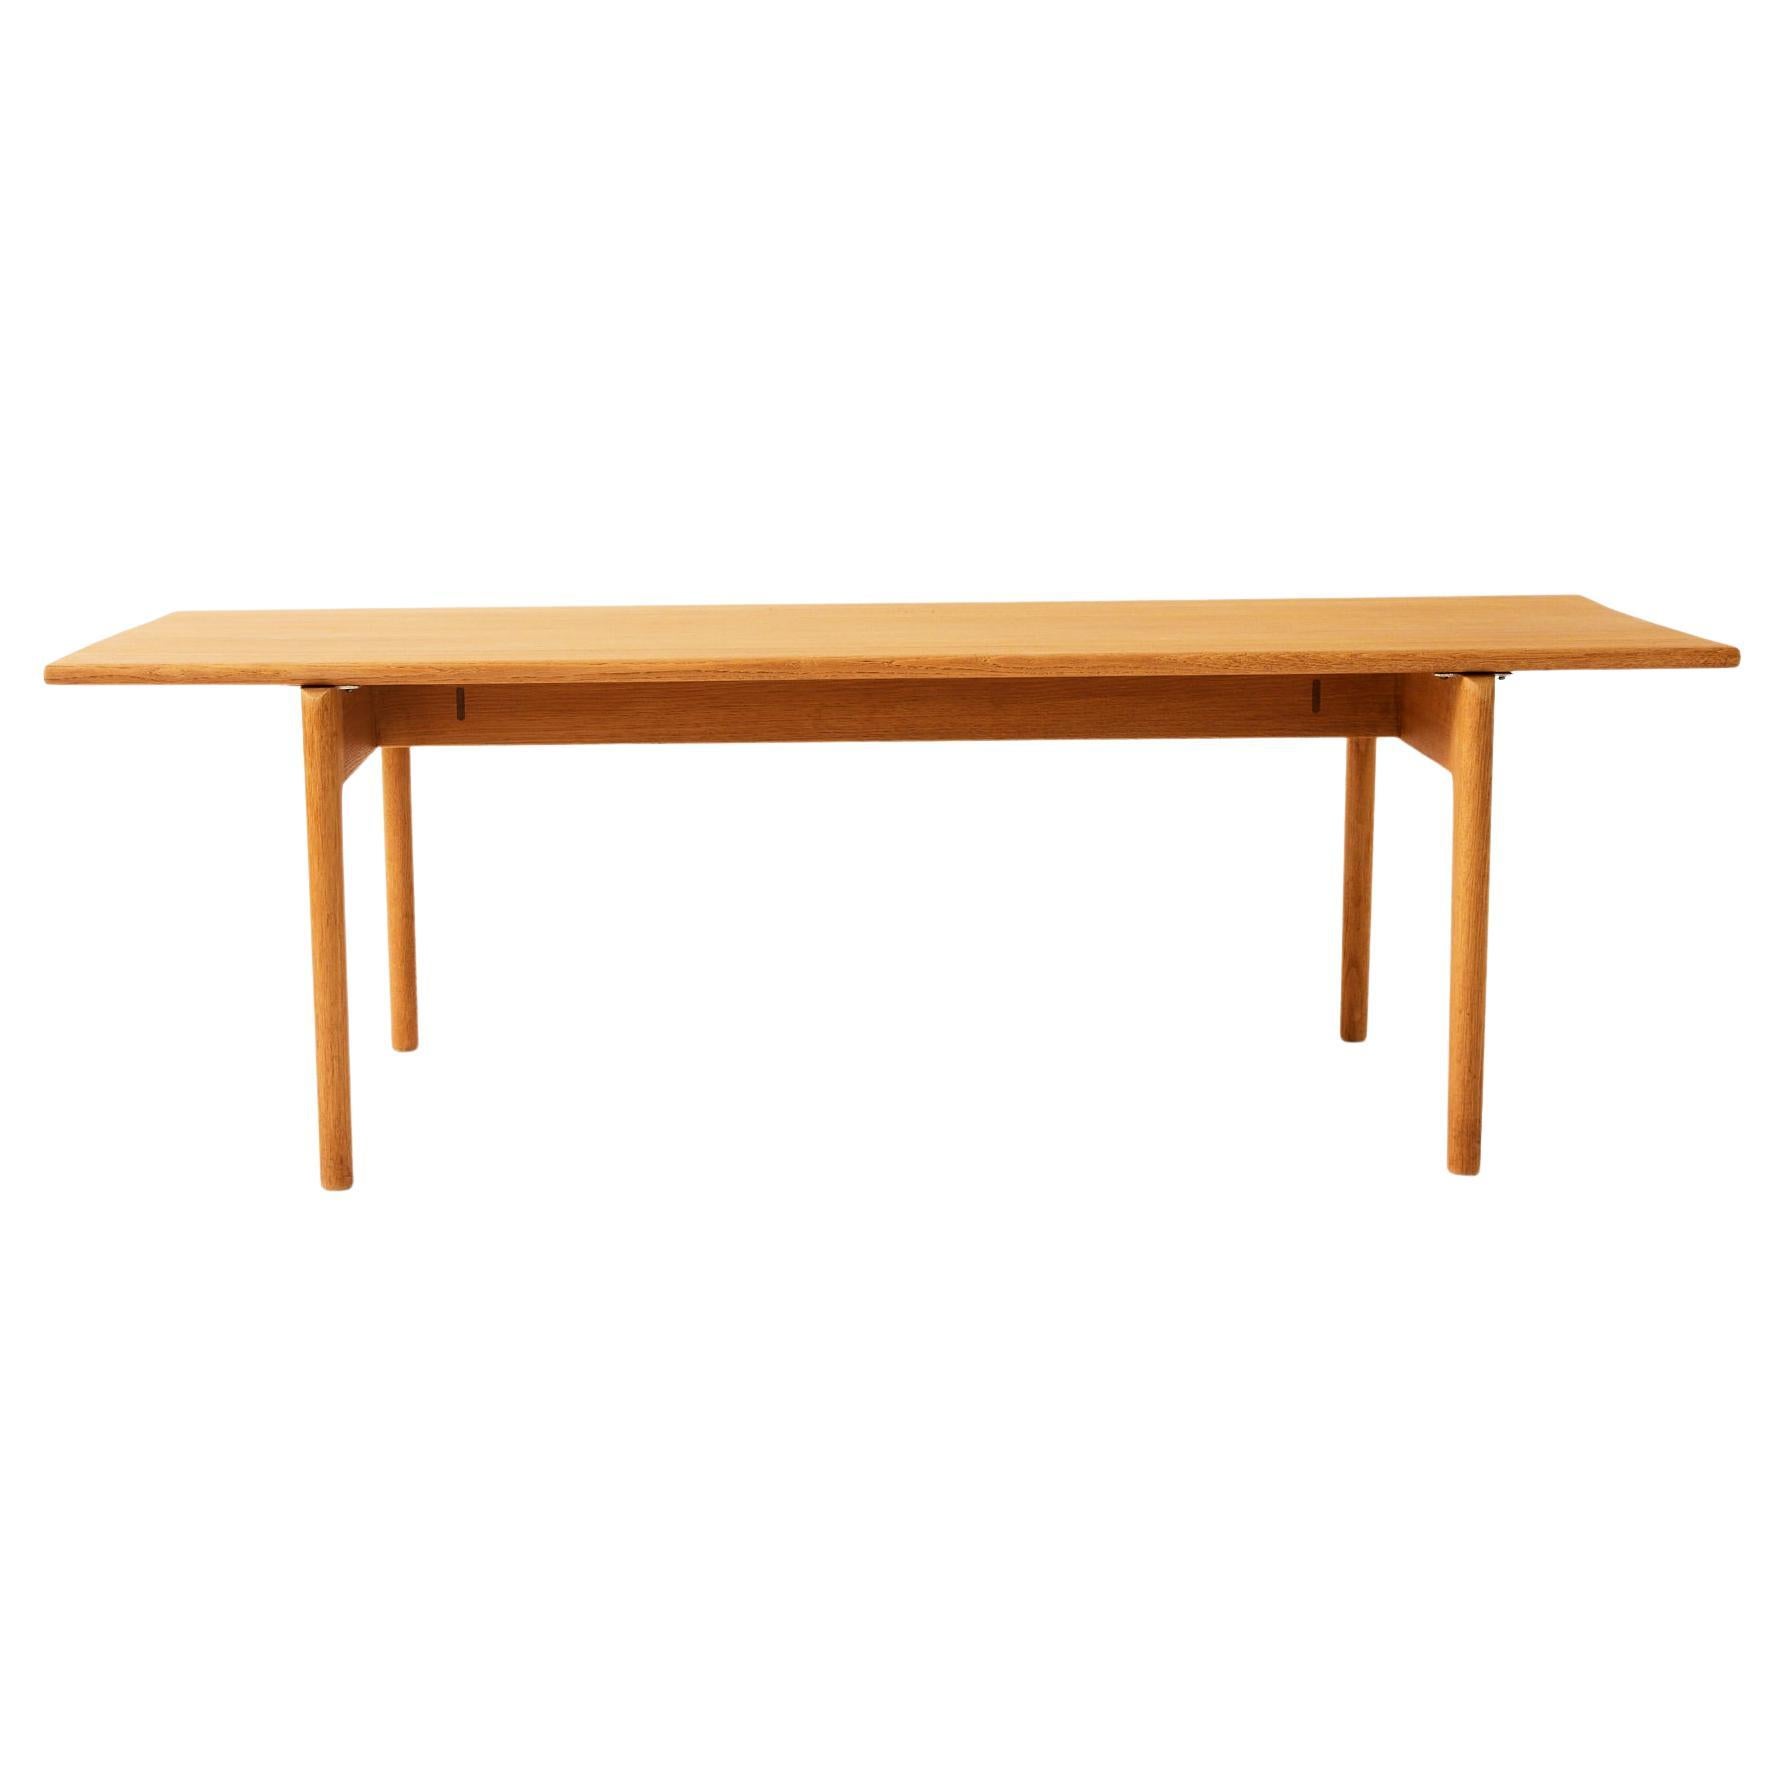 Hans J. Wegner's AT-15 rectangular solid oak coffee table is elegant and understated in its design. Made of solid oak and in very good condition. Makers mark is stamped on underside of table. Manufactured by Andreas Tuck, 1960's. 

Wegner was one